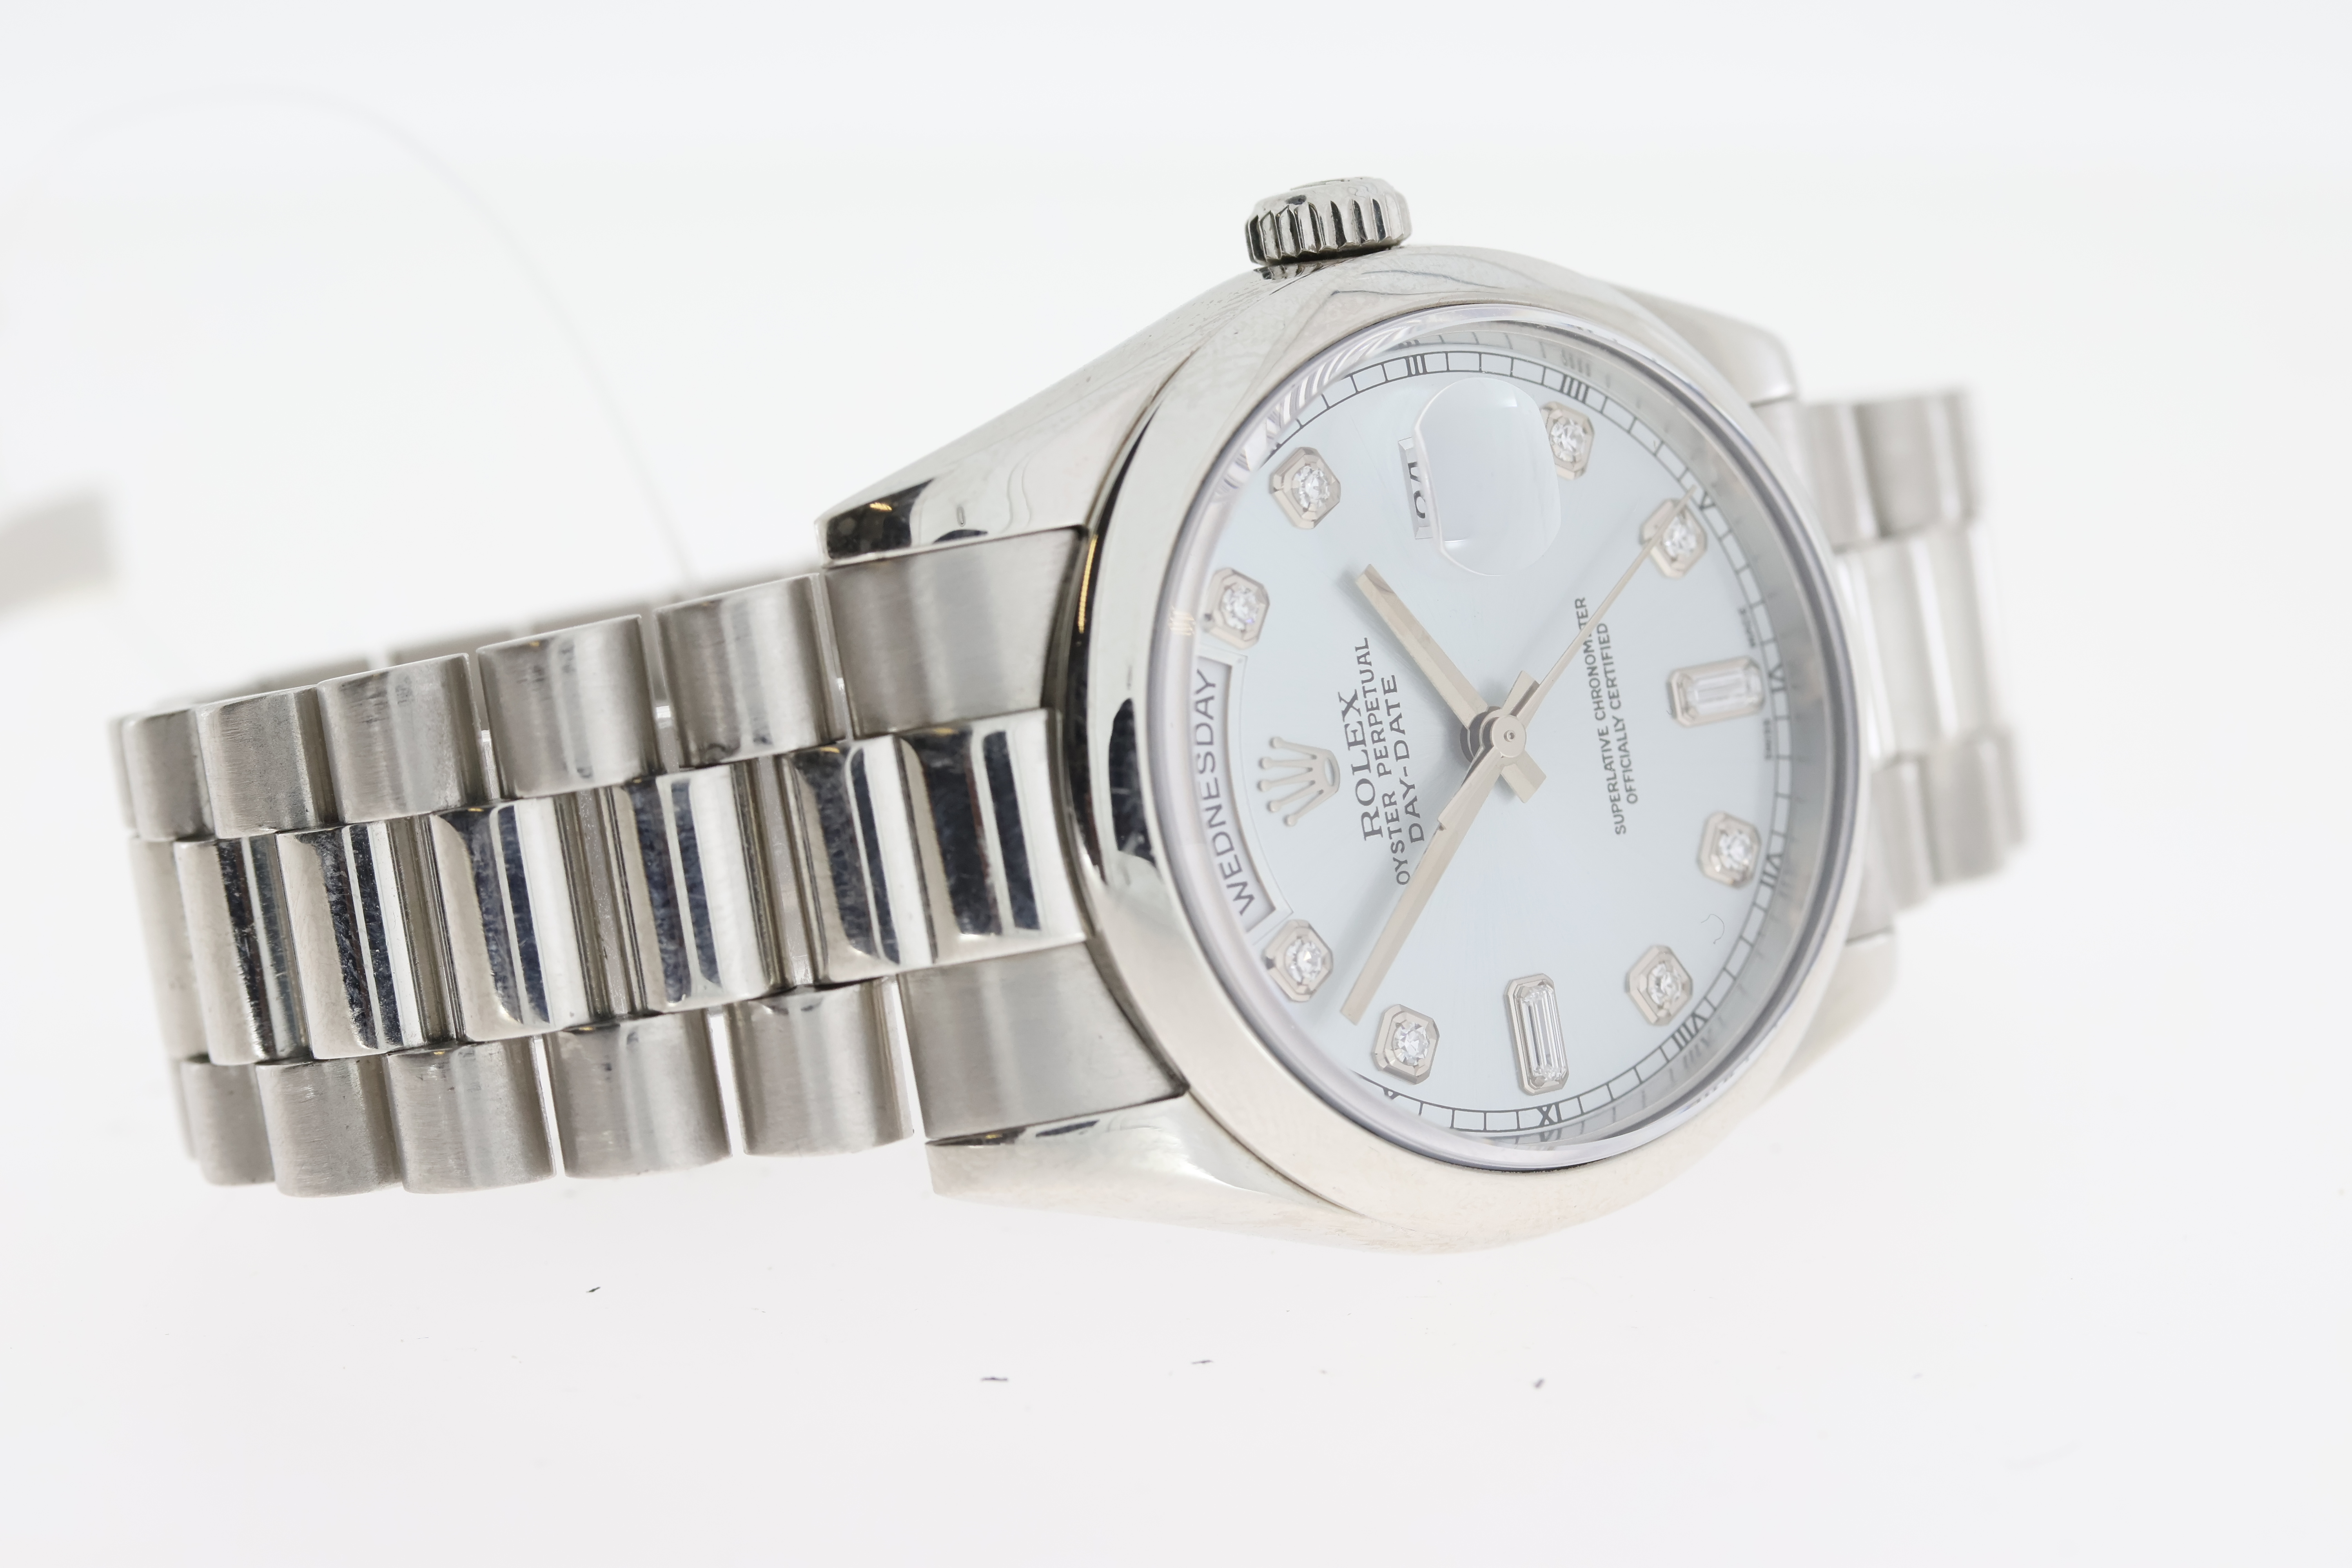 Rolex Day Date 36 Platinum Diamond Dial 118206 Automatic - Image 3 of 6